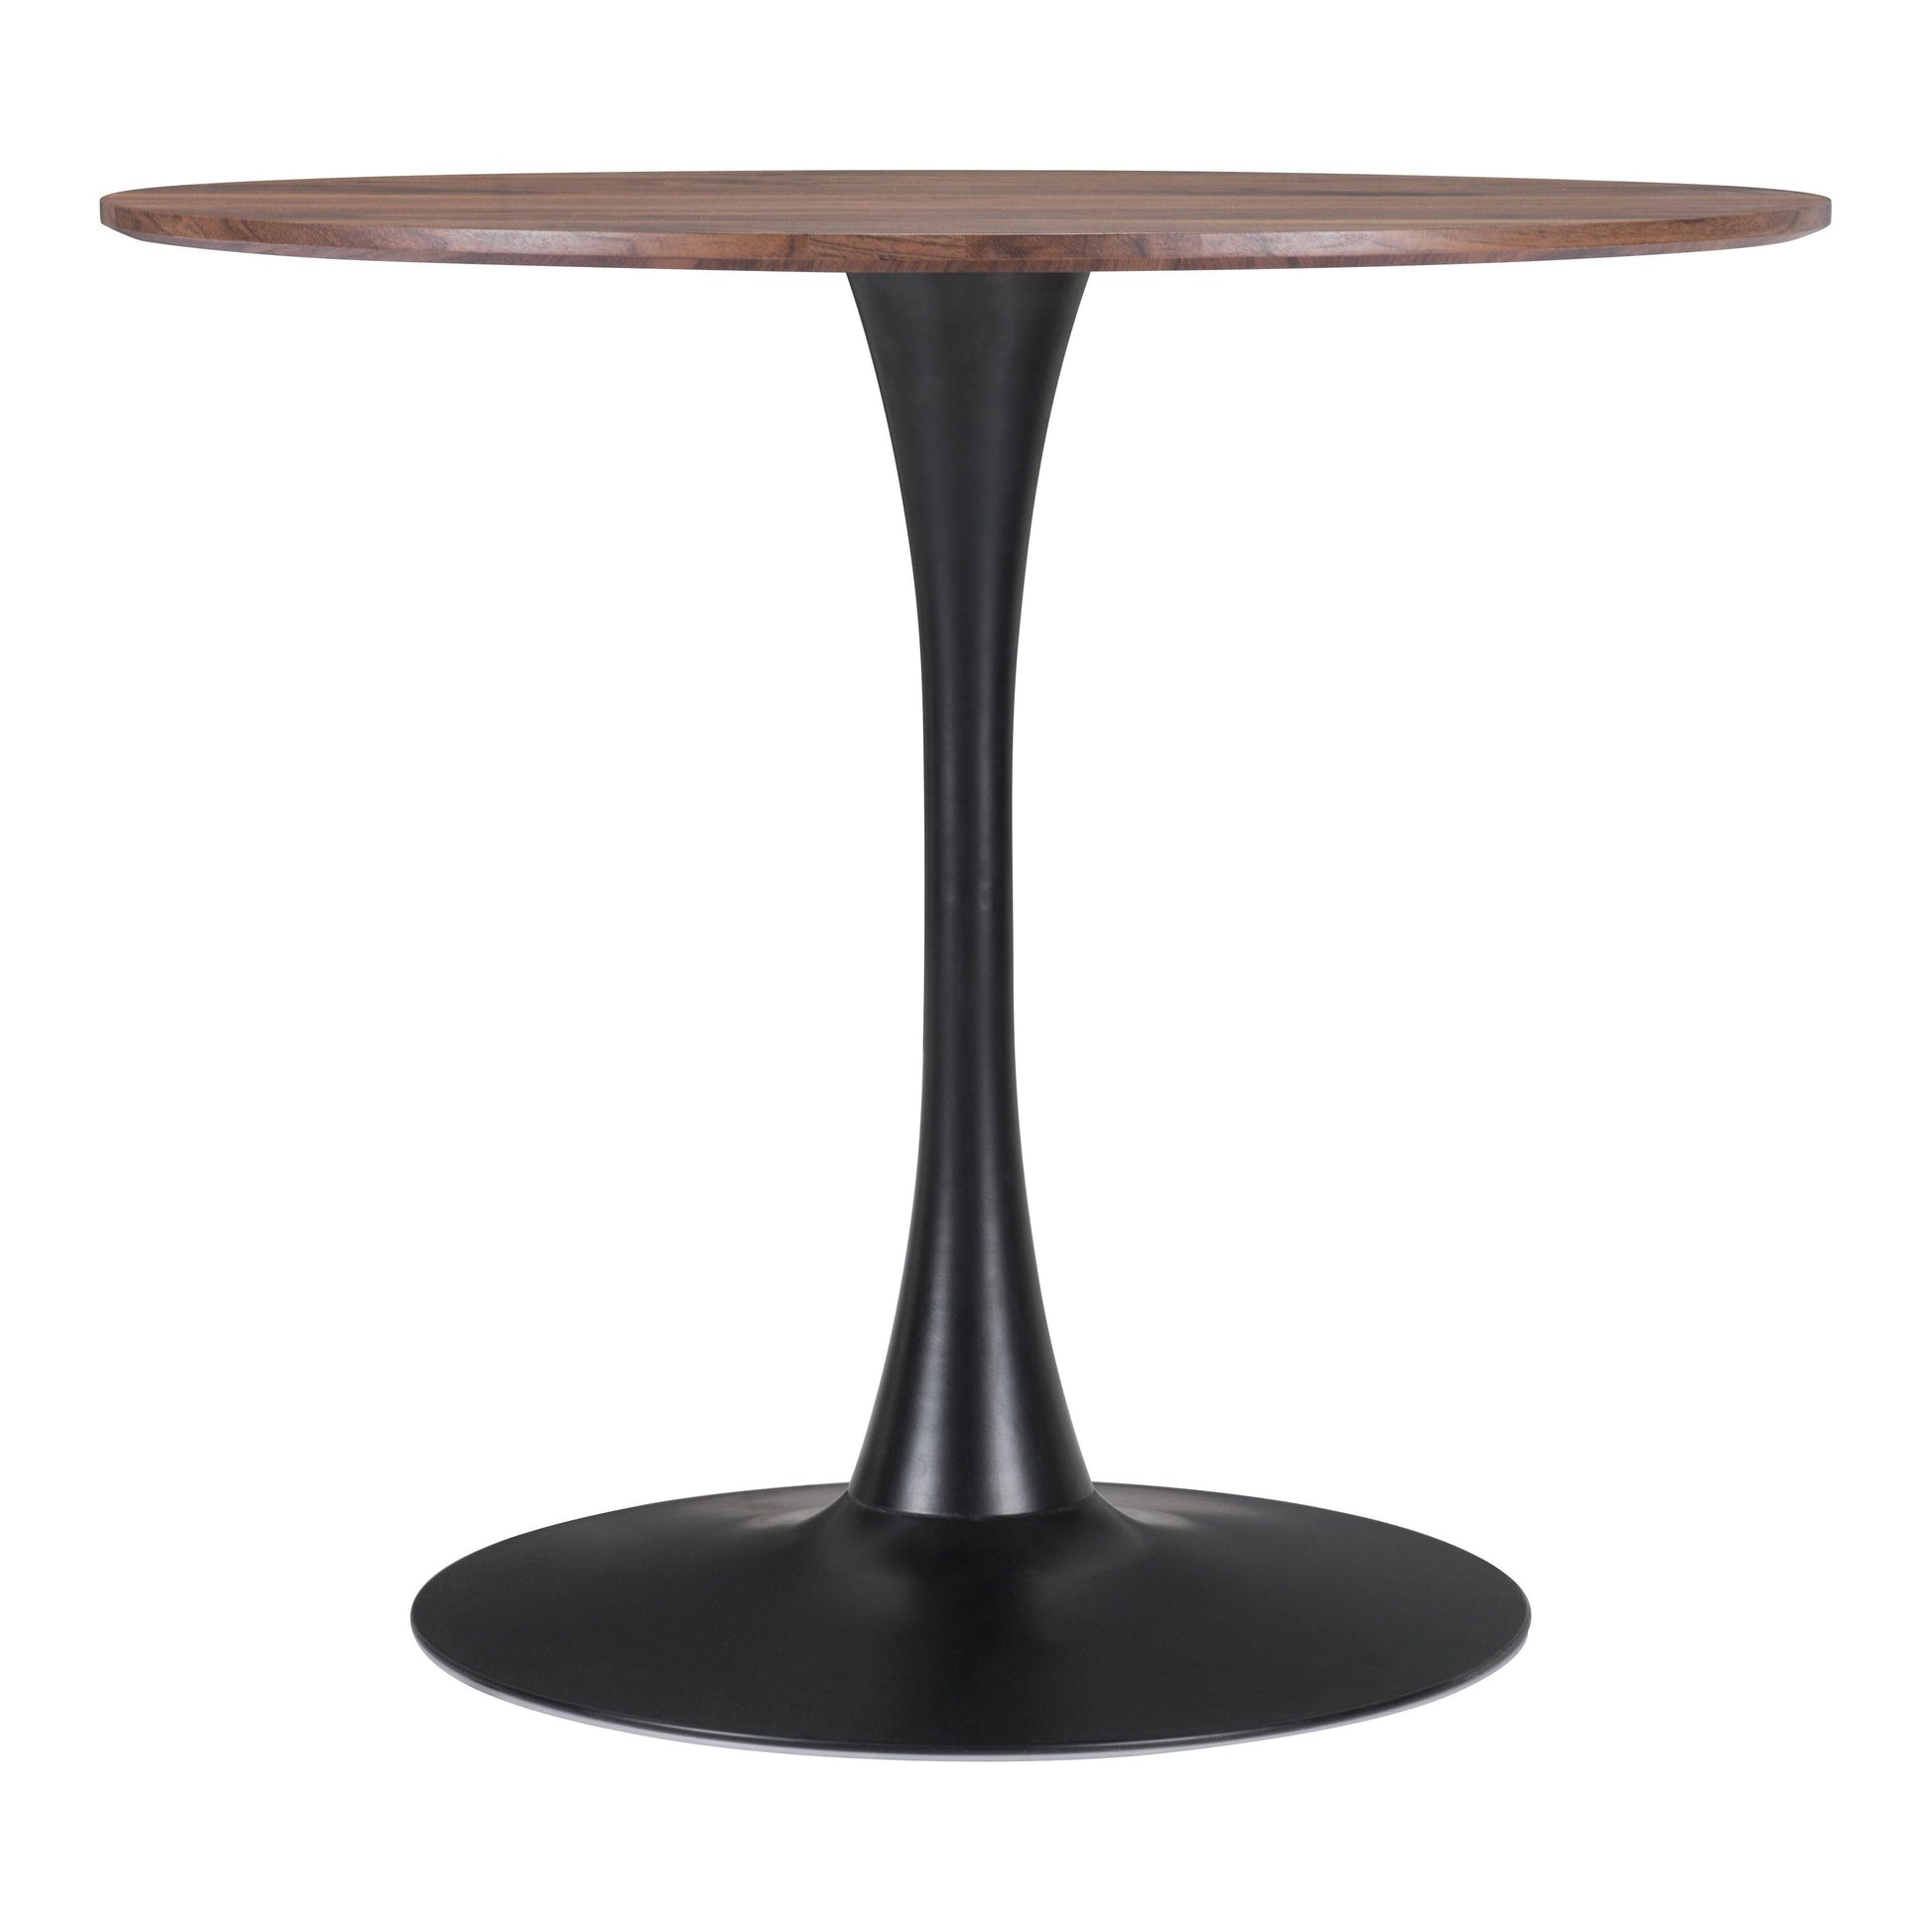 Opus Dining Table Brown & Black - Sideboards and Things Accents_Black, Brand_Zuo Modern, Color_Black, Color_Brown, Finish_Powder Coated, Height_30-40, Materials_Metal, Materials_Wood, Metal Type_Steel, Product Type_Dining Height, Seating Capacity_2, Seating Capacity_4, Shape_Round, Table Base_Metal, Table Top_Wood, Width_30-40, Wood Species_MDF